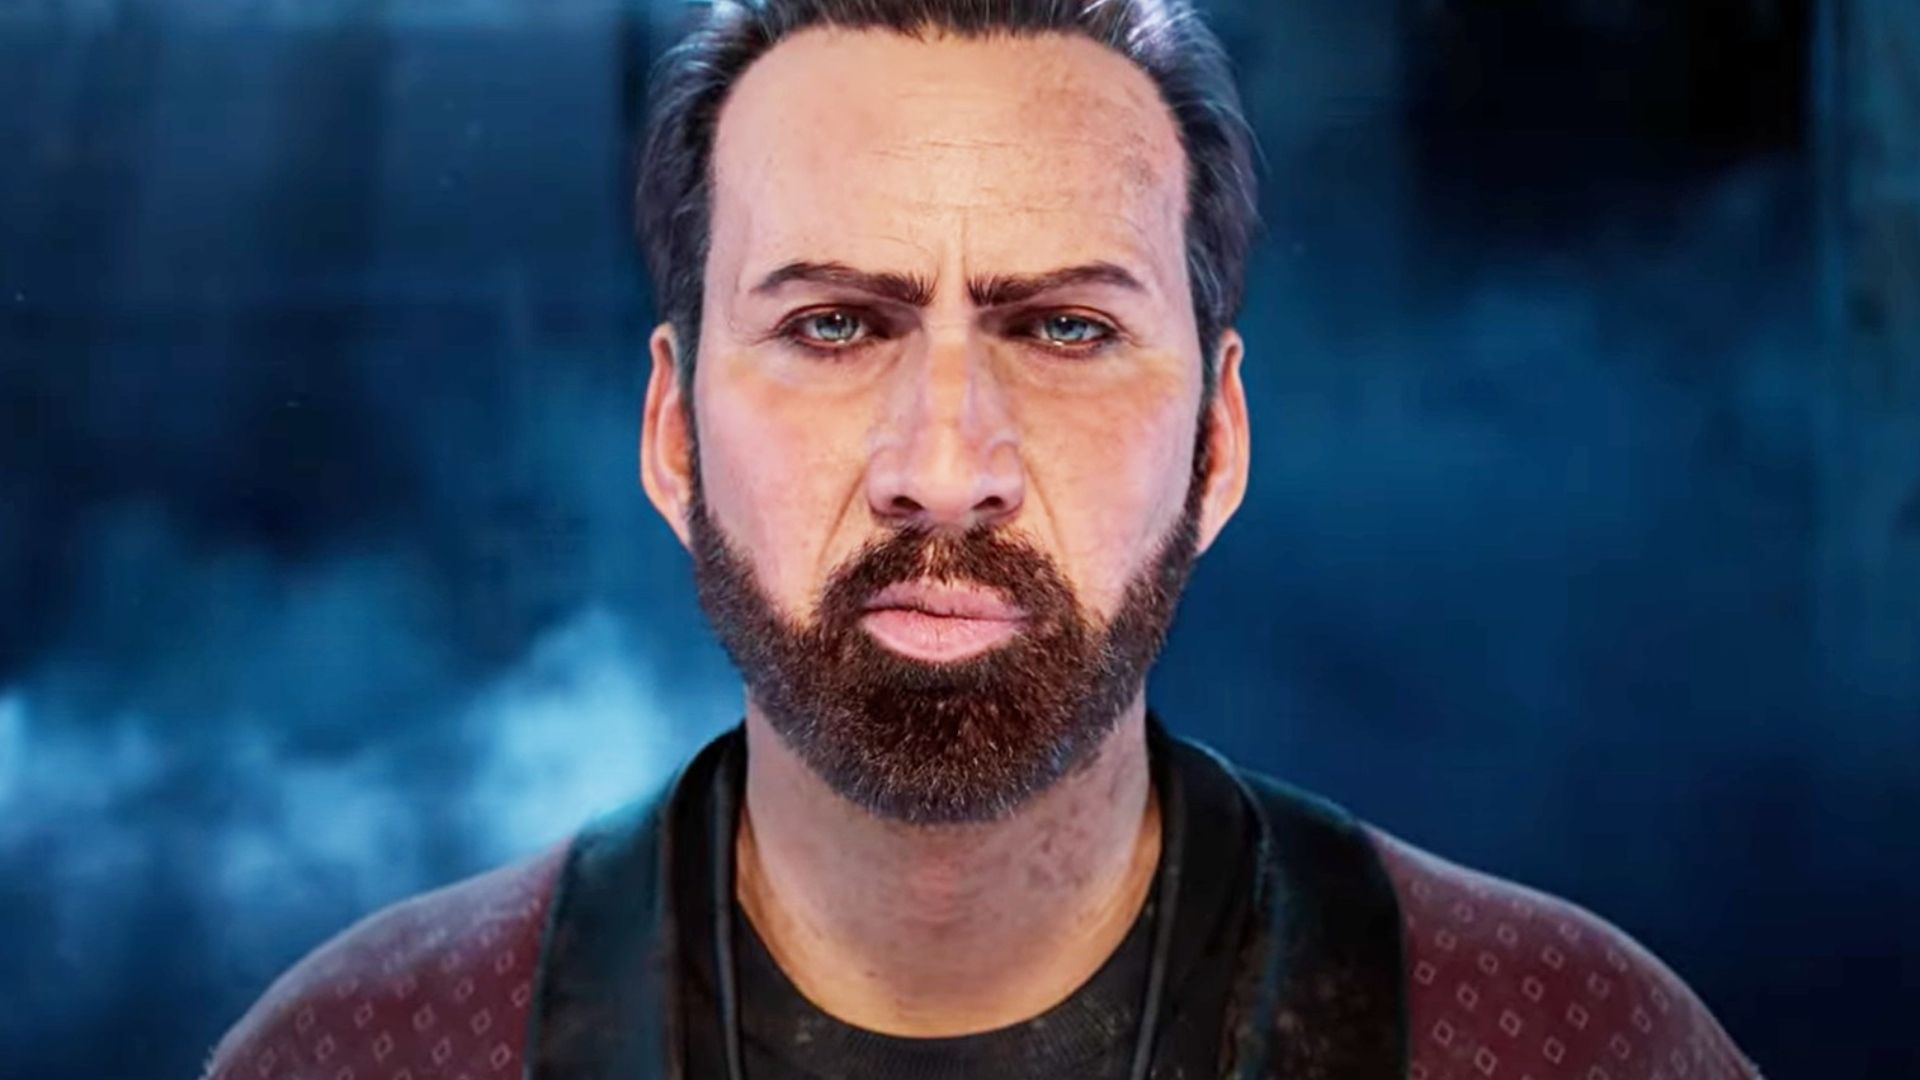 Dead by Daylight Public Test Build Allows Players to Play as Nicolas Cage